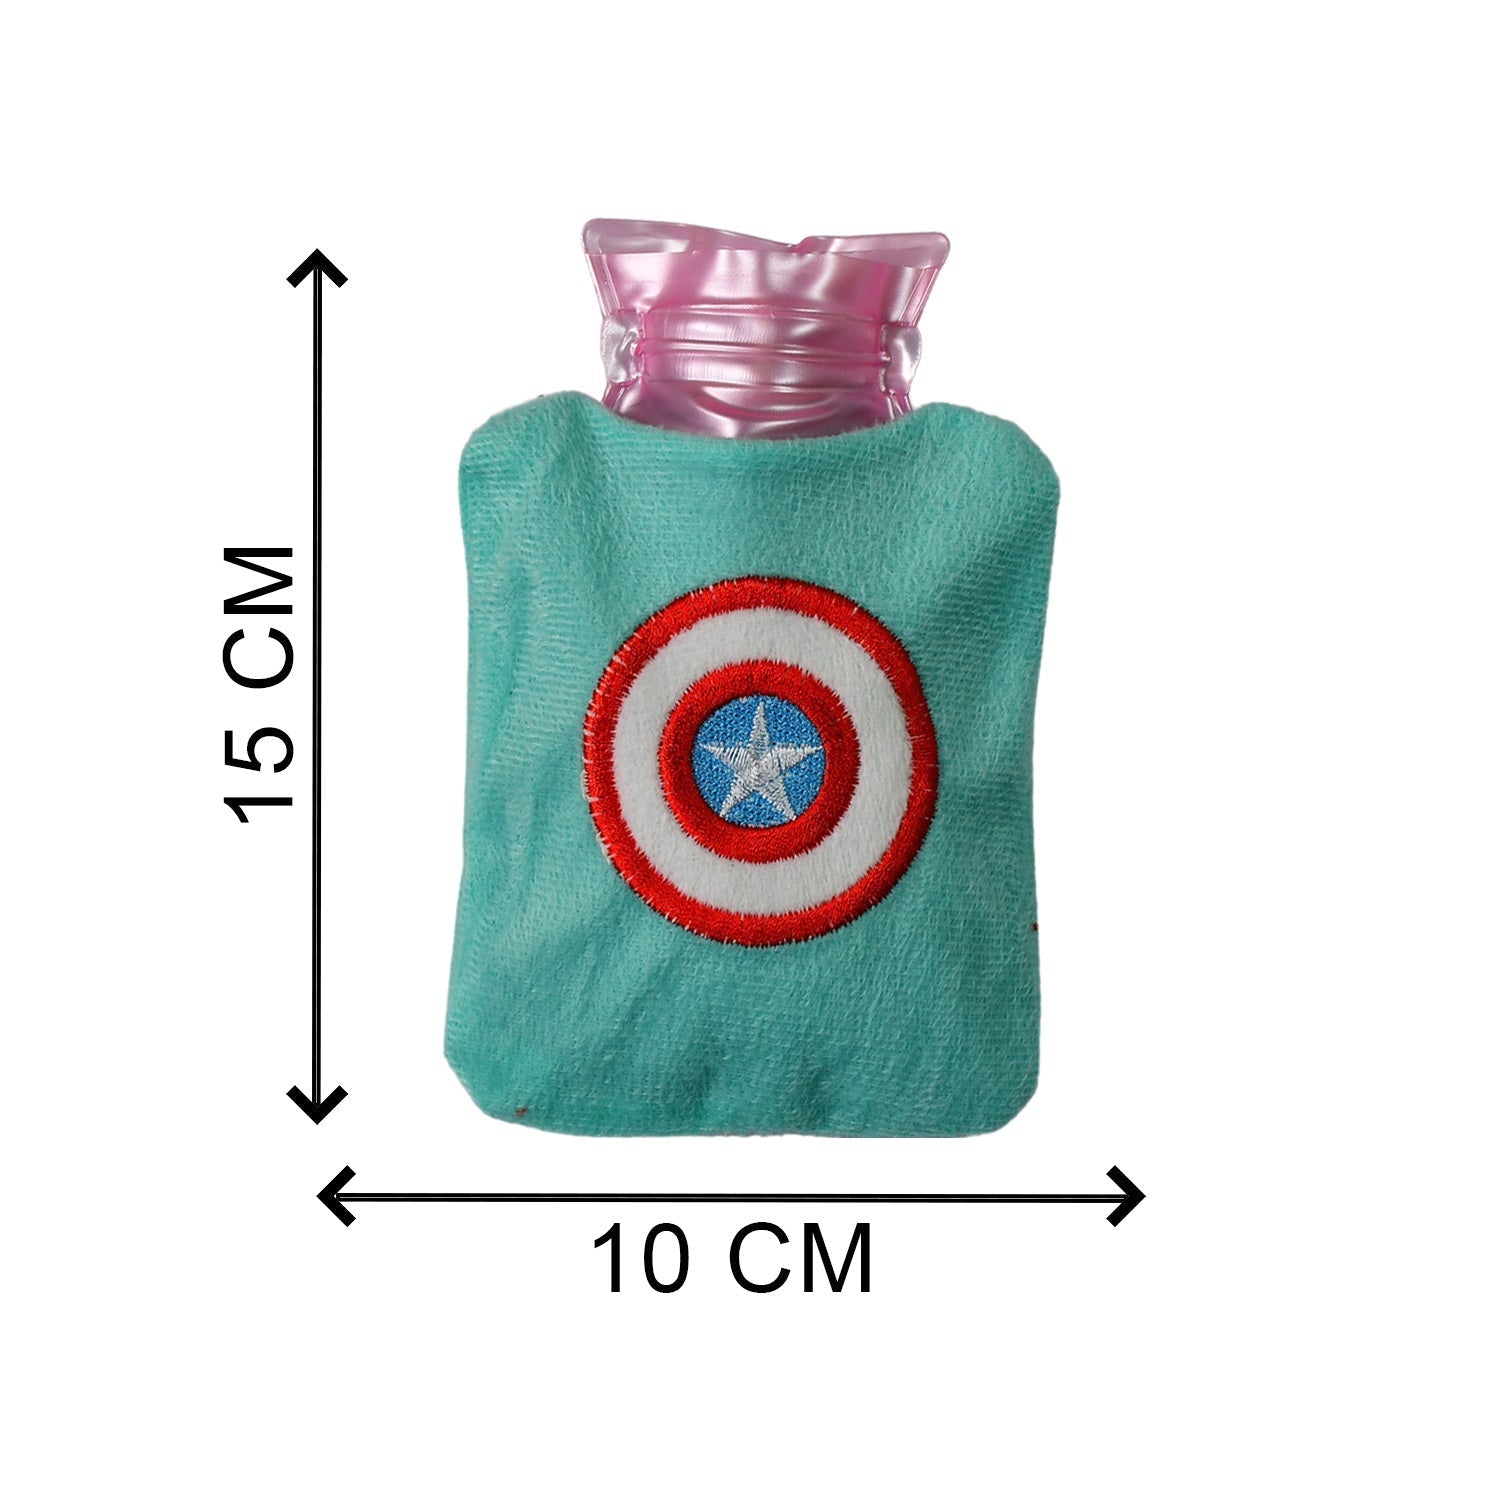 6517 Captain America's Shield small Hot Water Bag with Cover for Pain Relief, Neck, Shoulder Pain and Hand, Feet Warmer, Menstrual Cramps. DeoDap